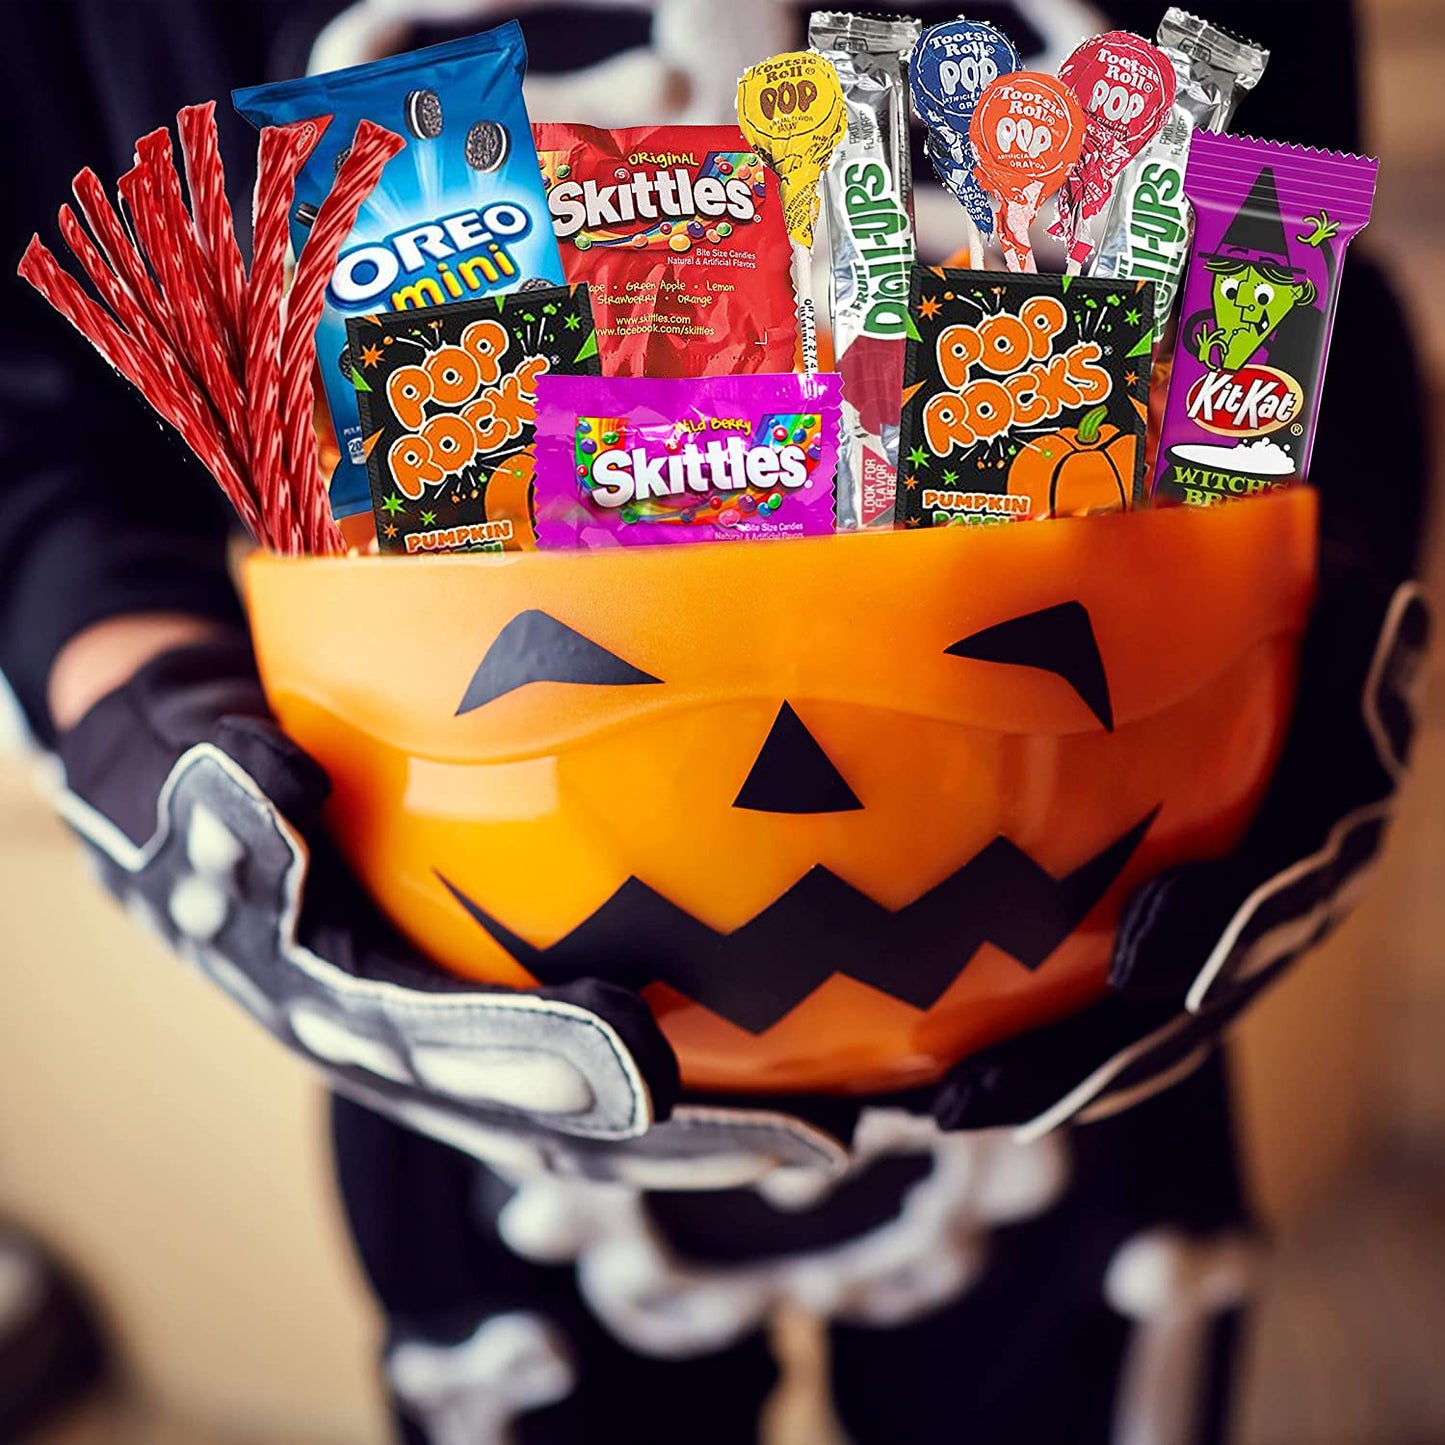 Halloween Care Package Snack box (80) Candy Snacks Assortment Trick or Treat Cookies Food Bars Toys Variety Gift Pack Box Bundle Mixed Bulk Sampler for Children Kids Boys Girls College Students Office